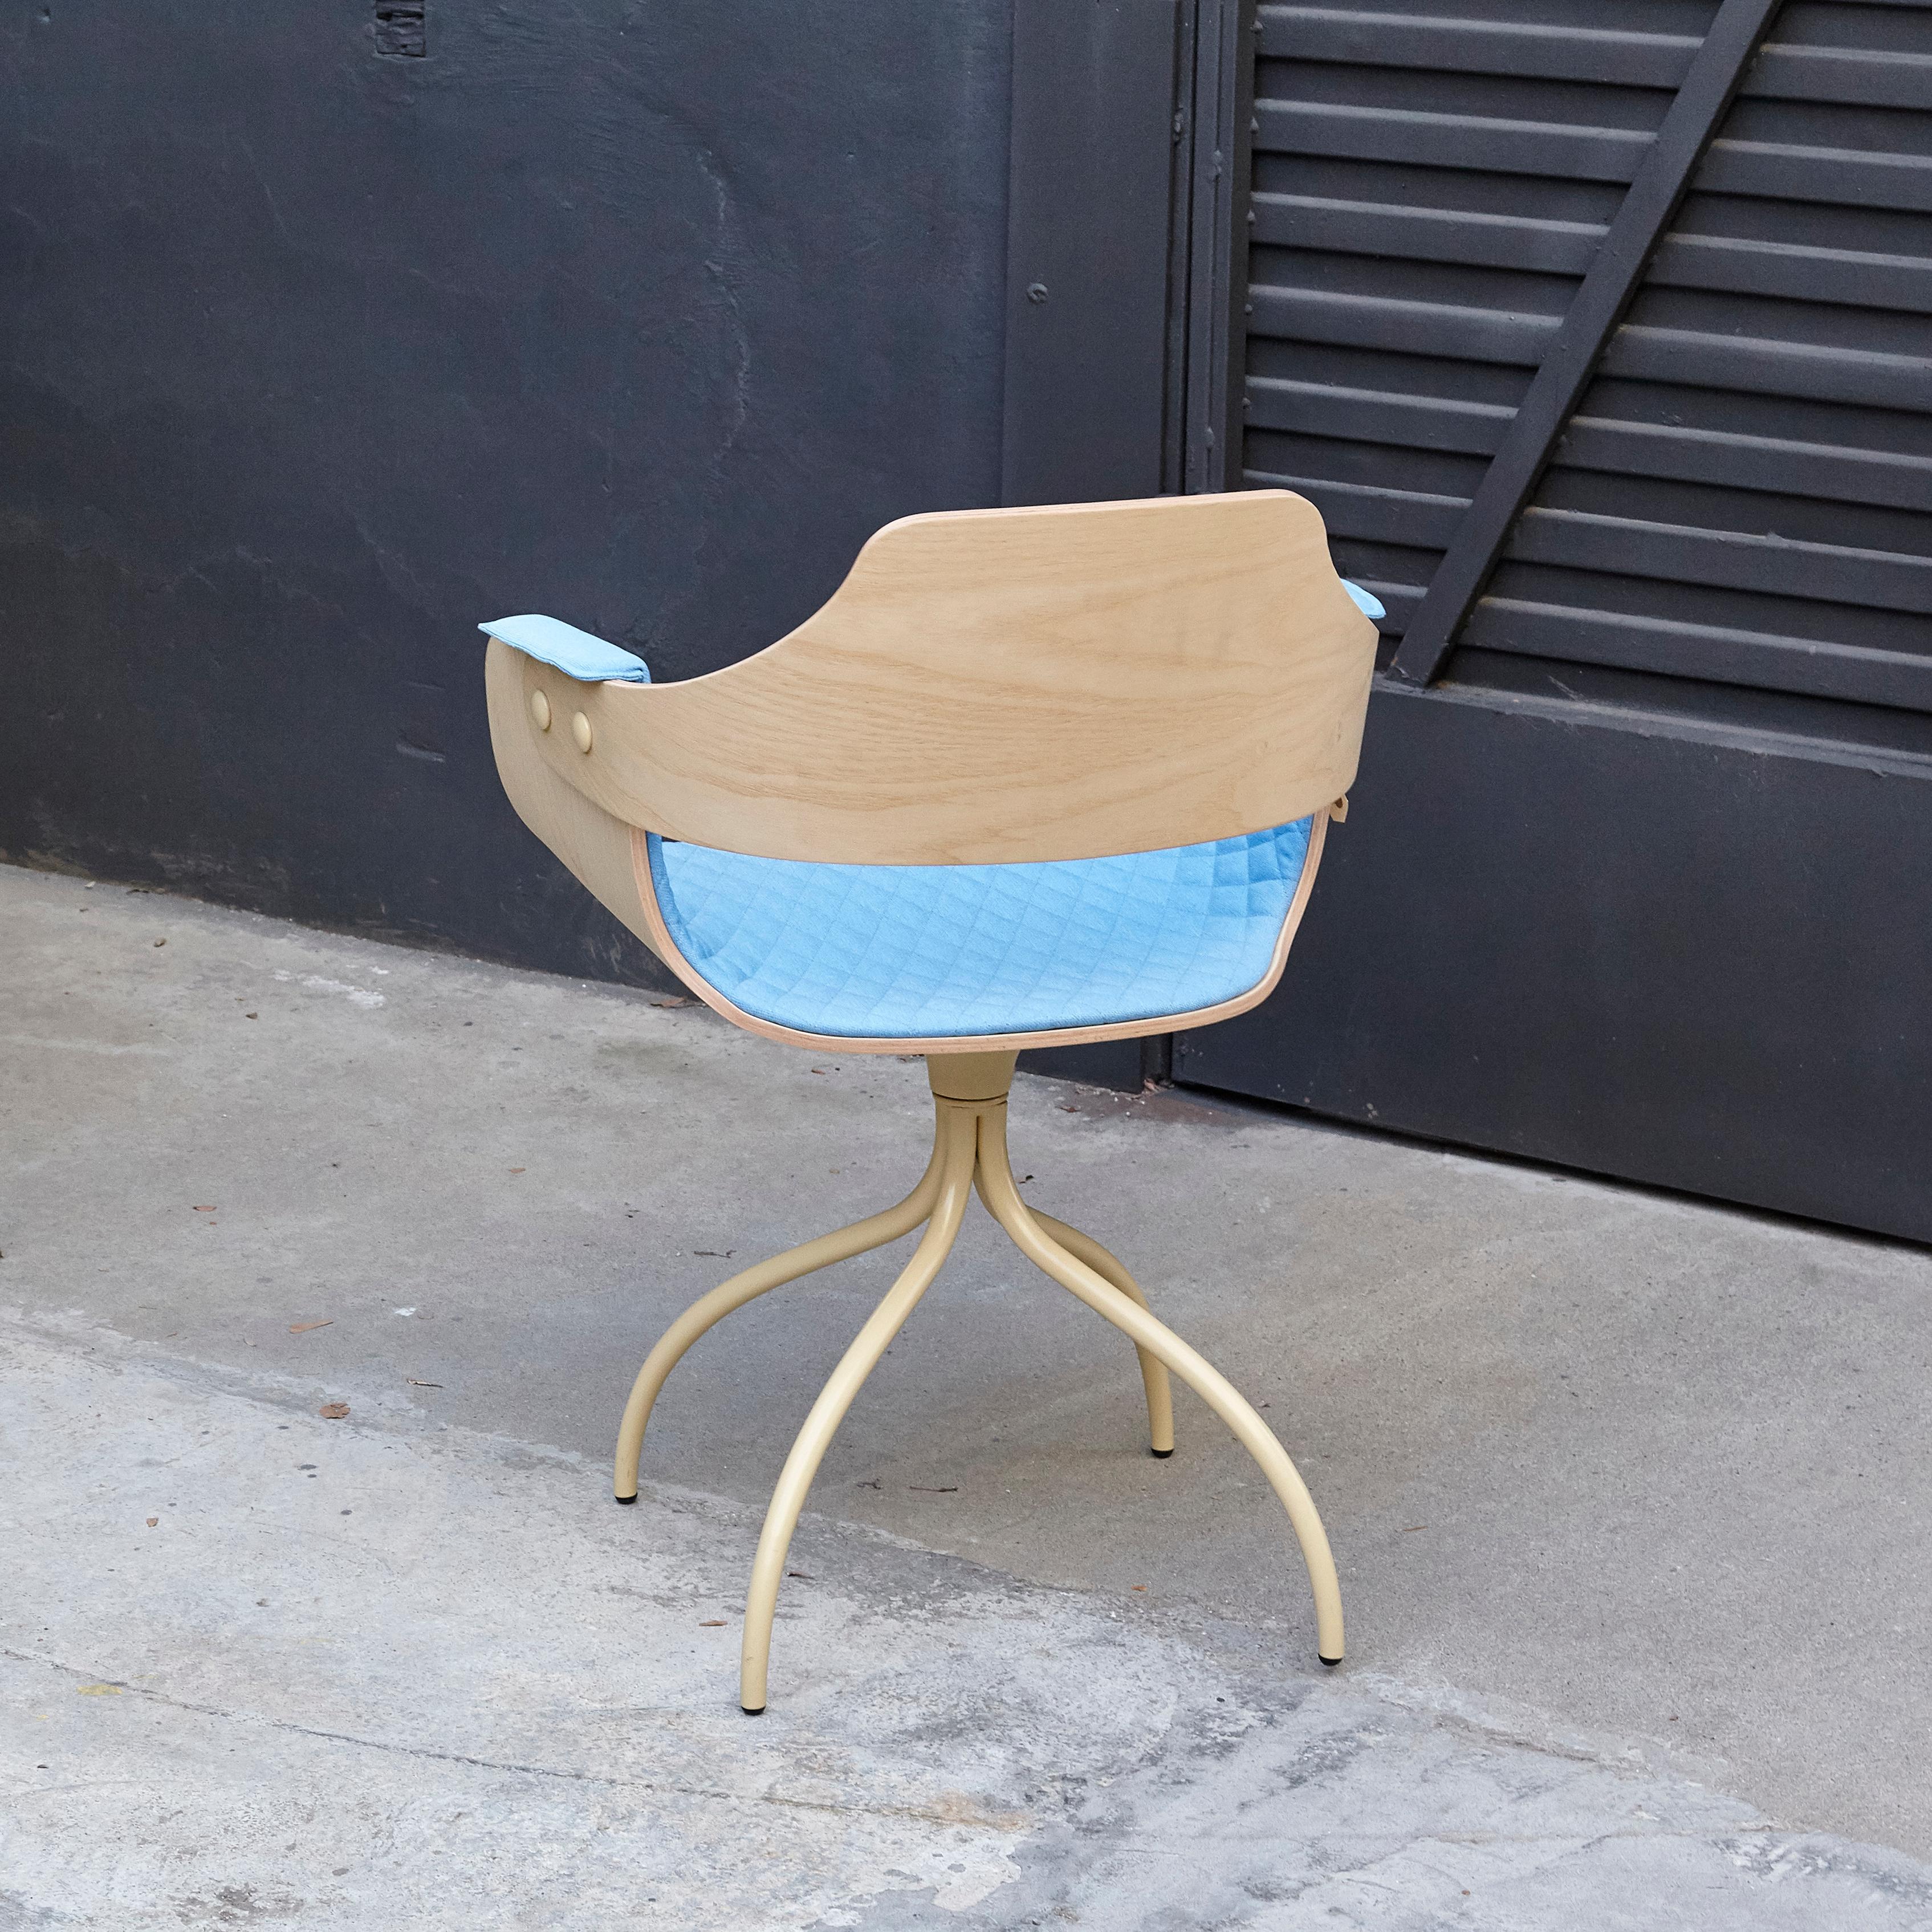 Modern Jaime Hayon, Contemporary Upholstered Blue Wood Chair Showtime by BD Barcelona